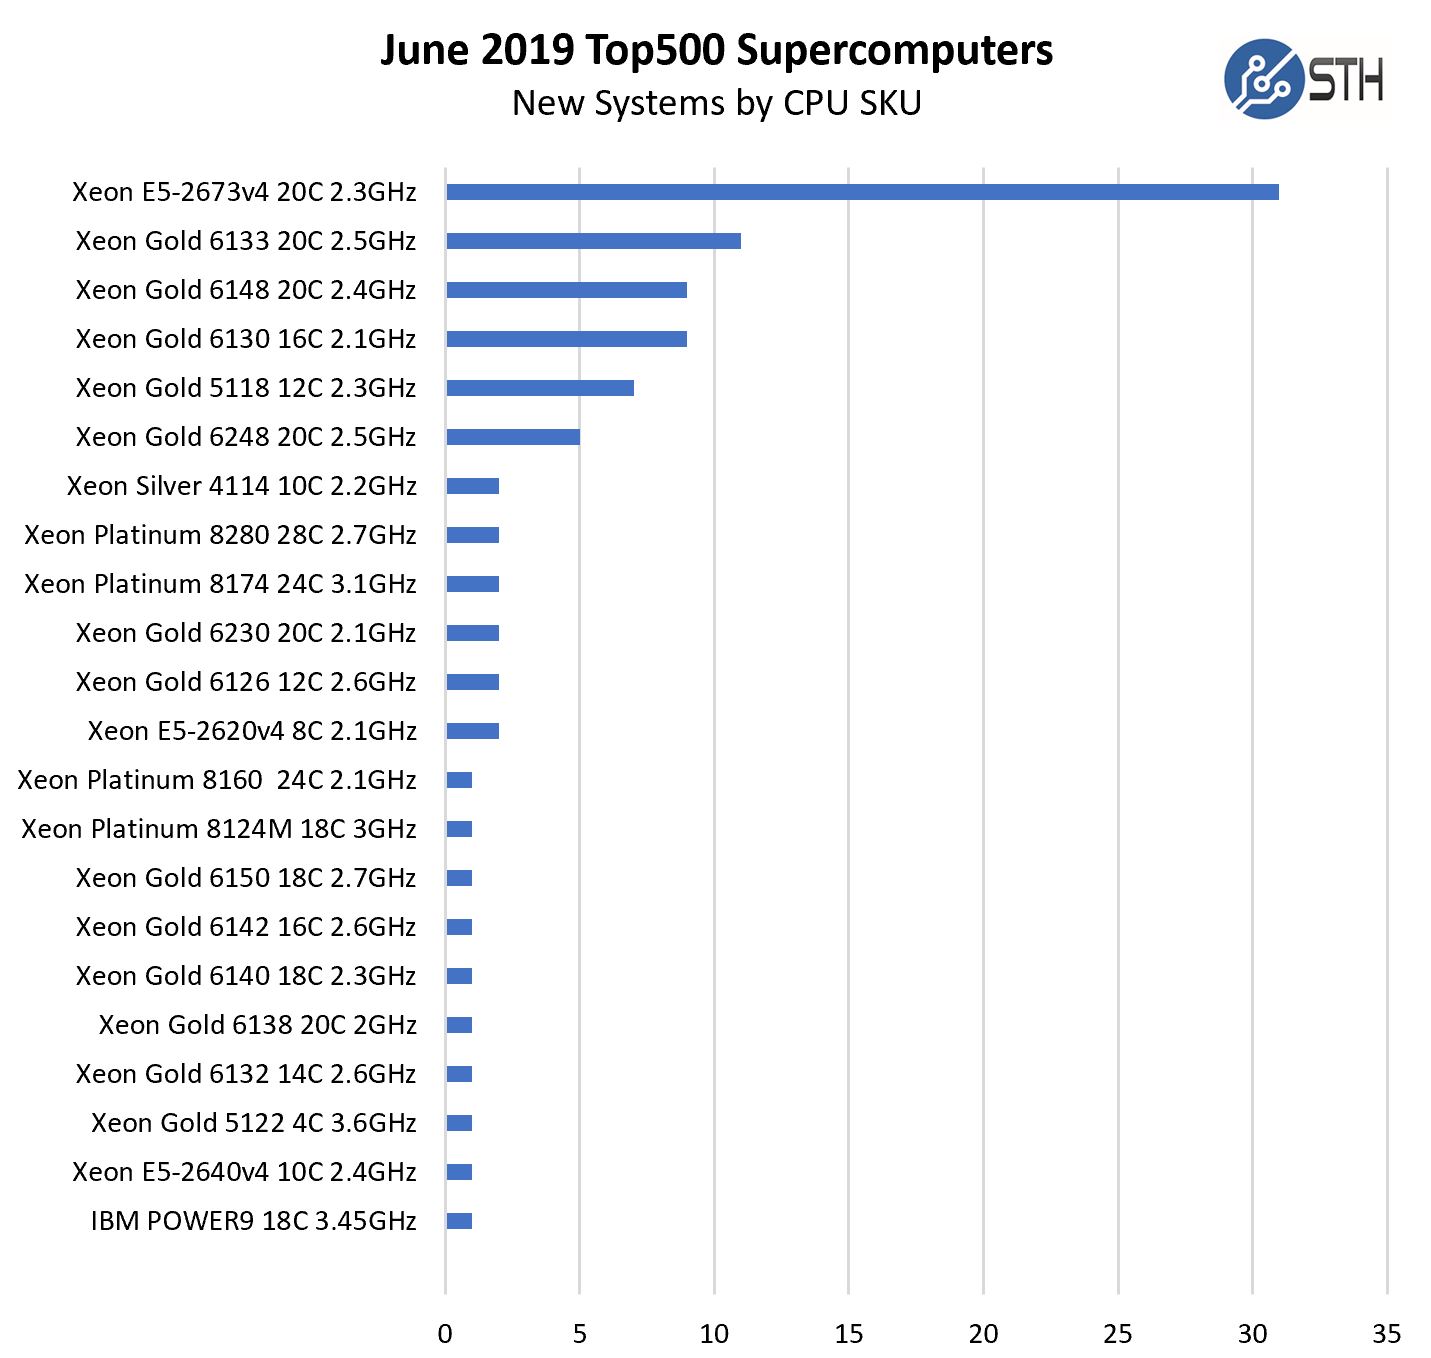 June 2019 Top500 New Systems By CPU SKU